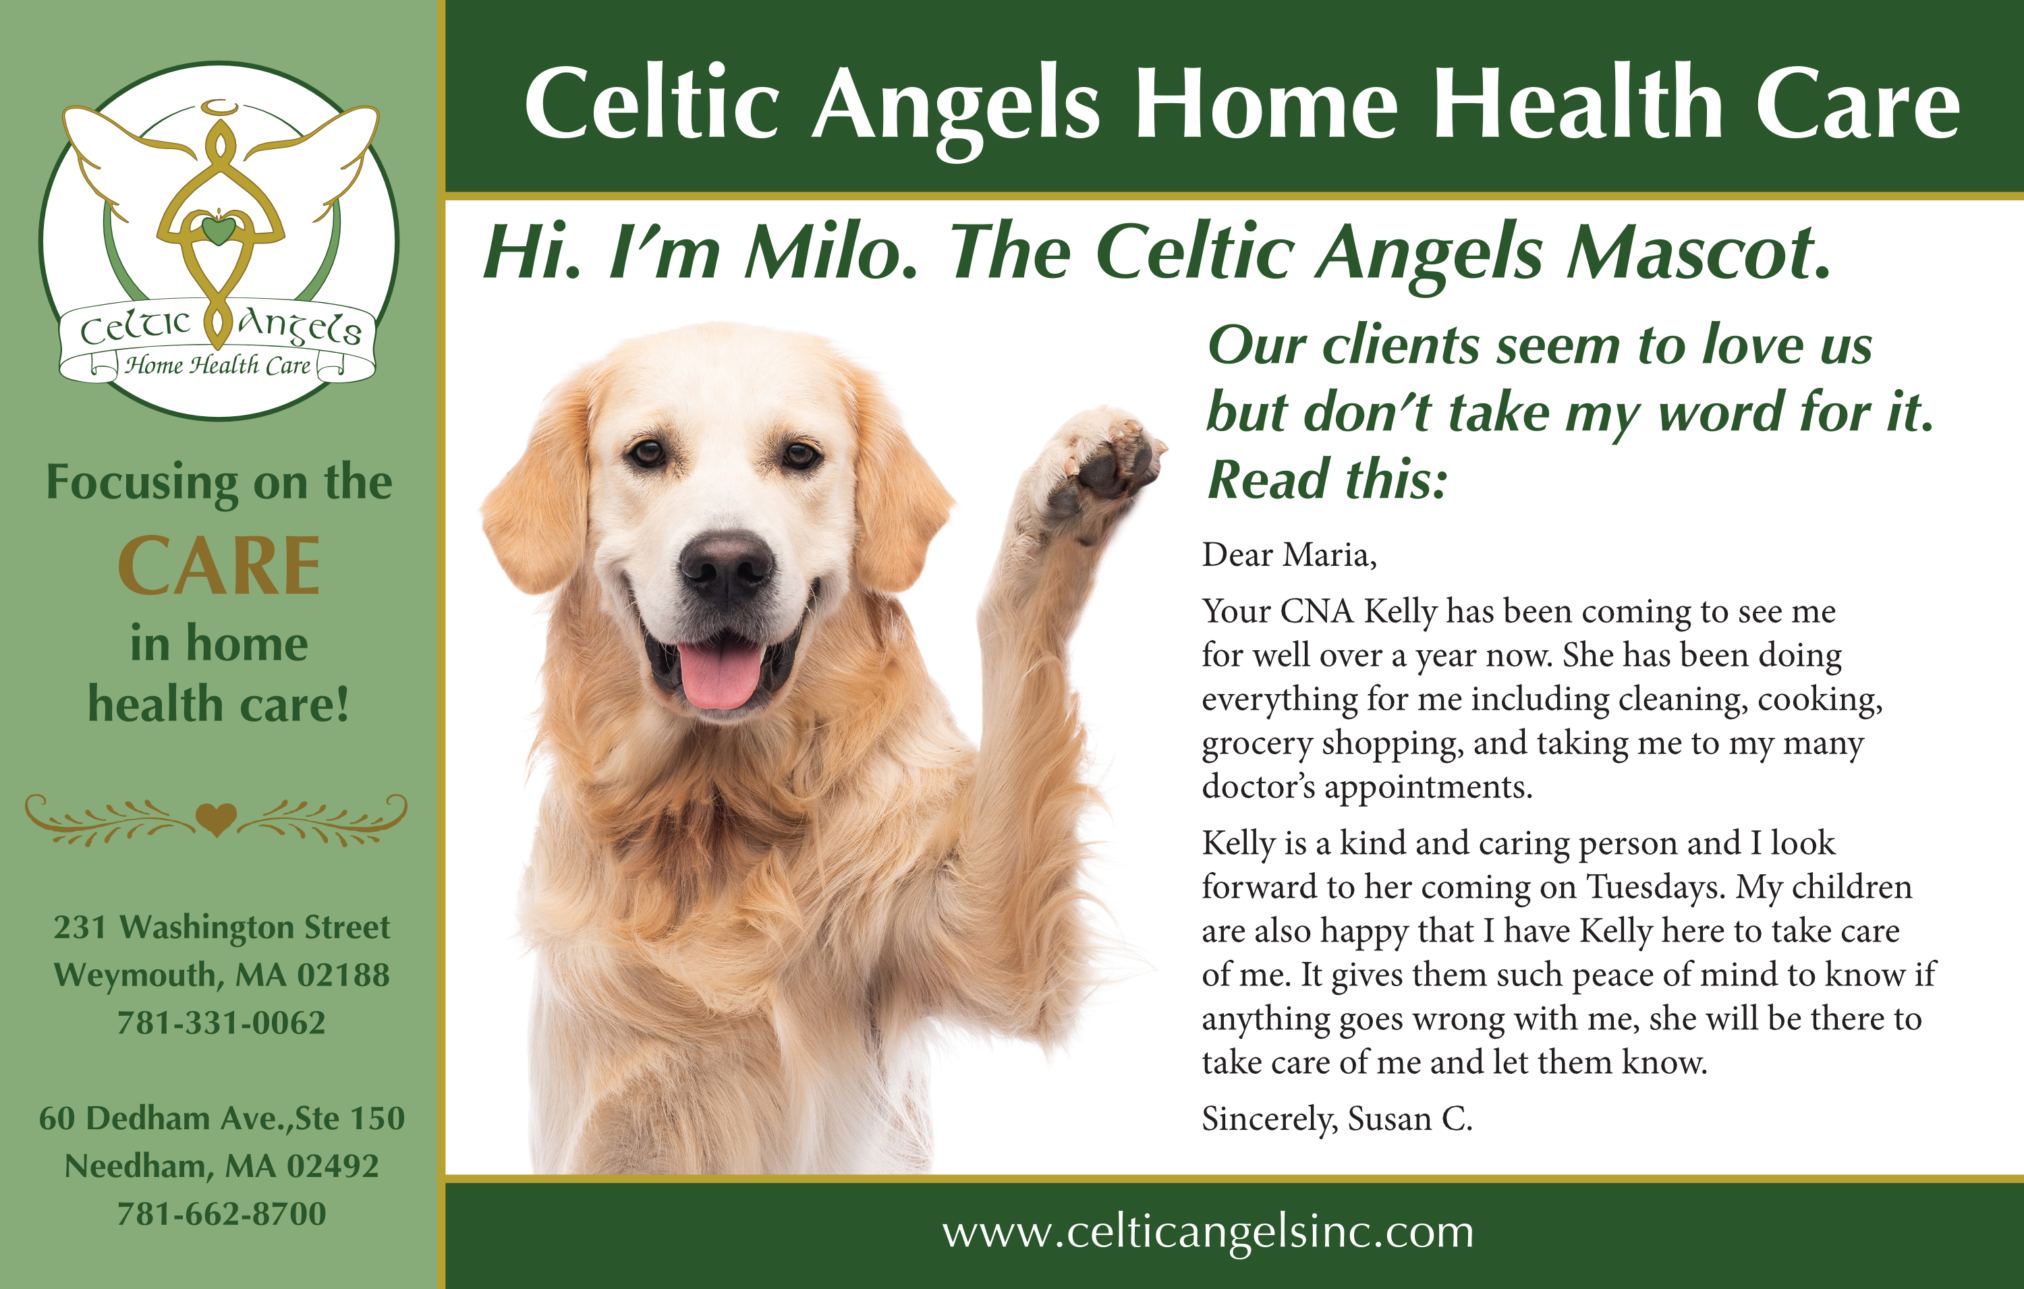 Celtic Angels Home Health Care